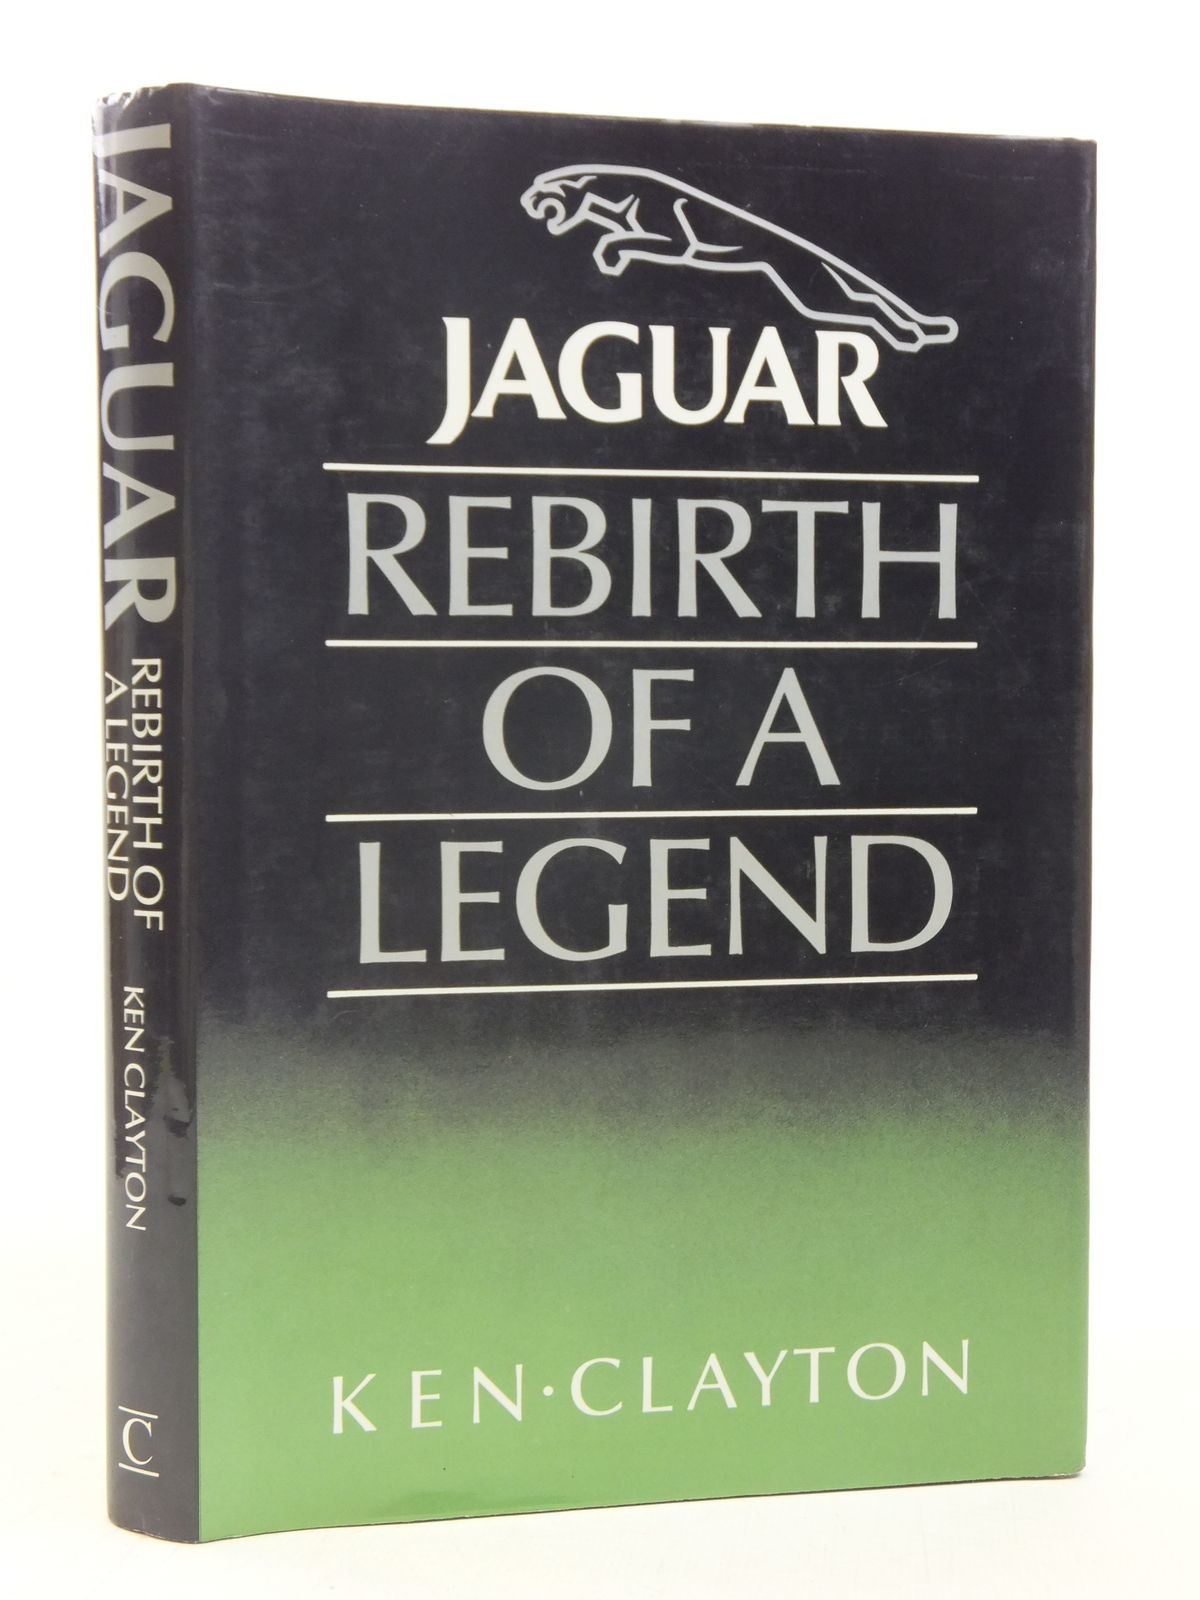 Photo of JAGUAR REBIRTH OF A LEGEND written by Clayton, Ken published by Century (STOCK CODE: 2115723)  for sale by Stella & Rose's Books